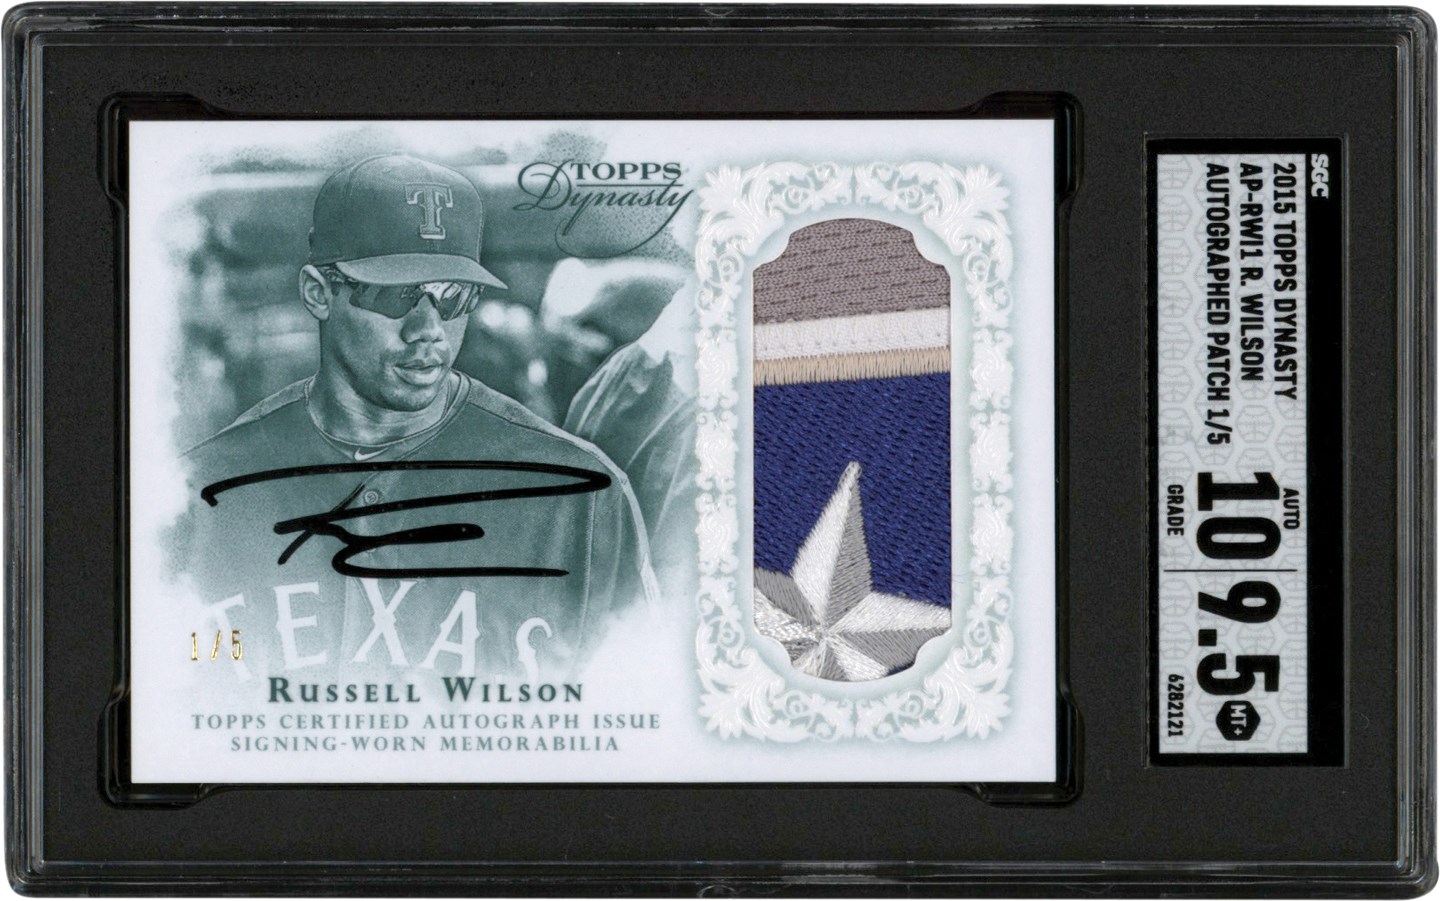 - 015 Topps Dynasty Baseball Russell Wilson Autograph Patch Card #1/5 SGC MINT+ 9.5 Auto 10 (Pop 1 of 1 - Highest Graded)